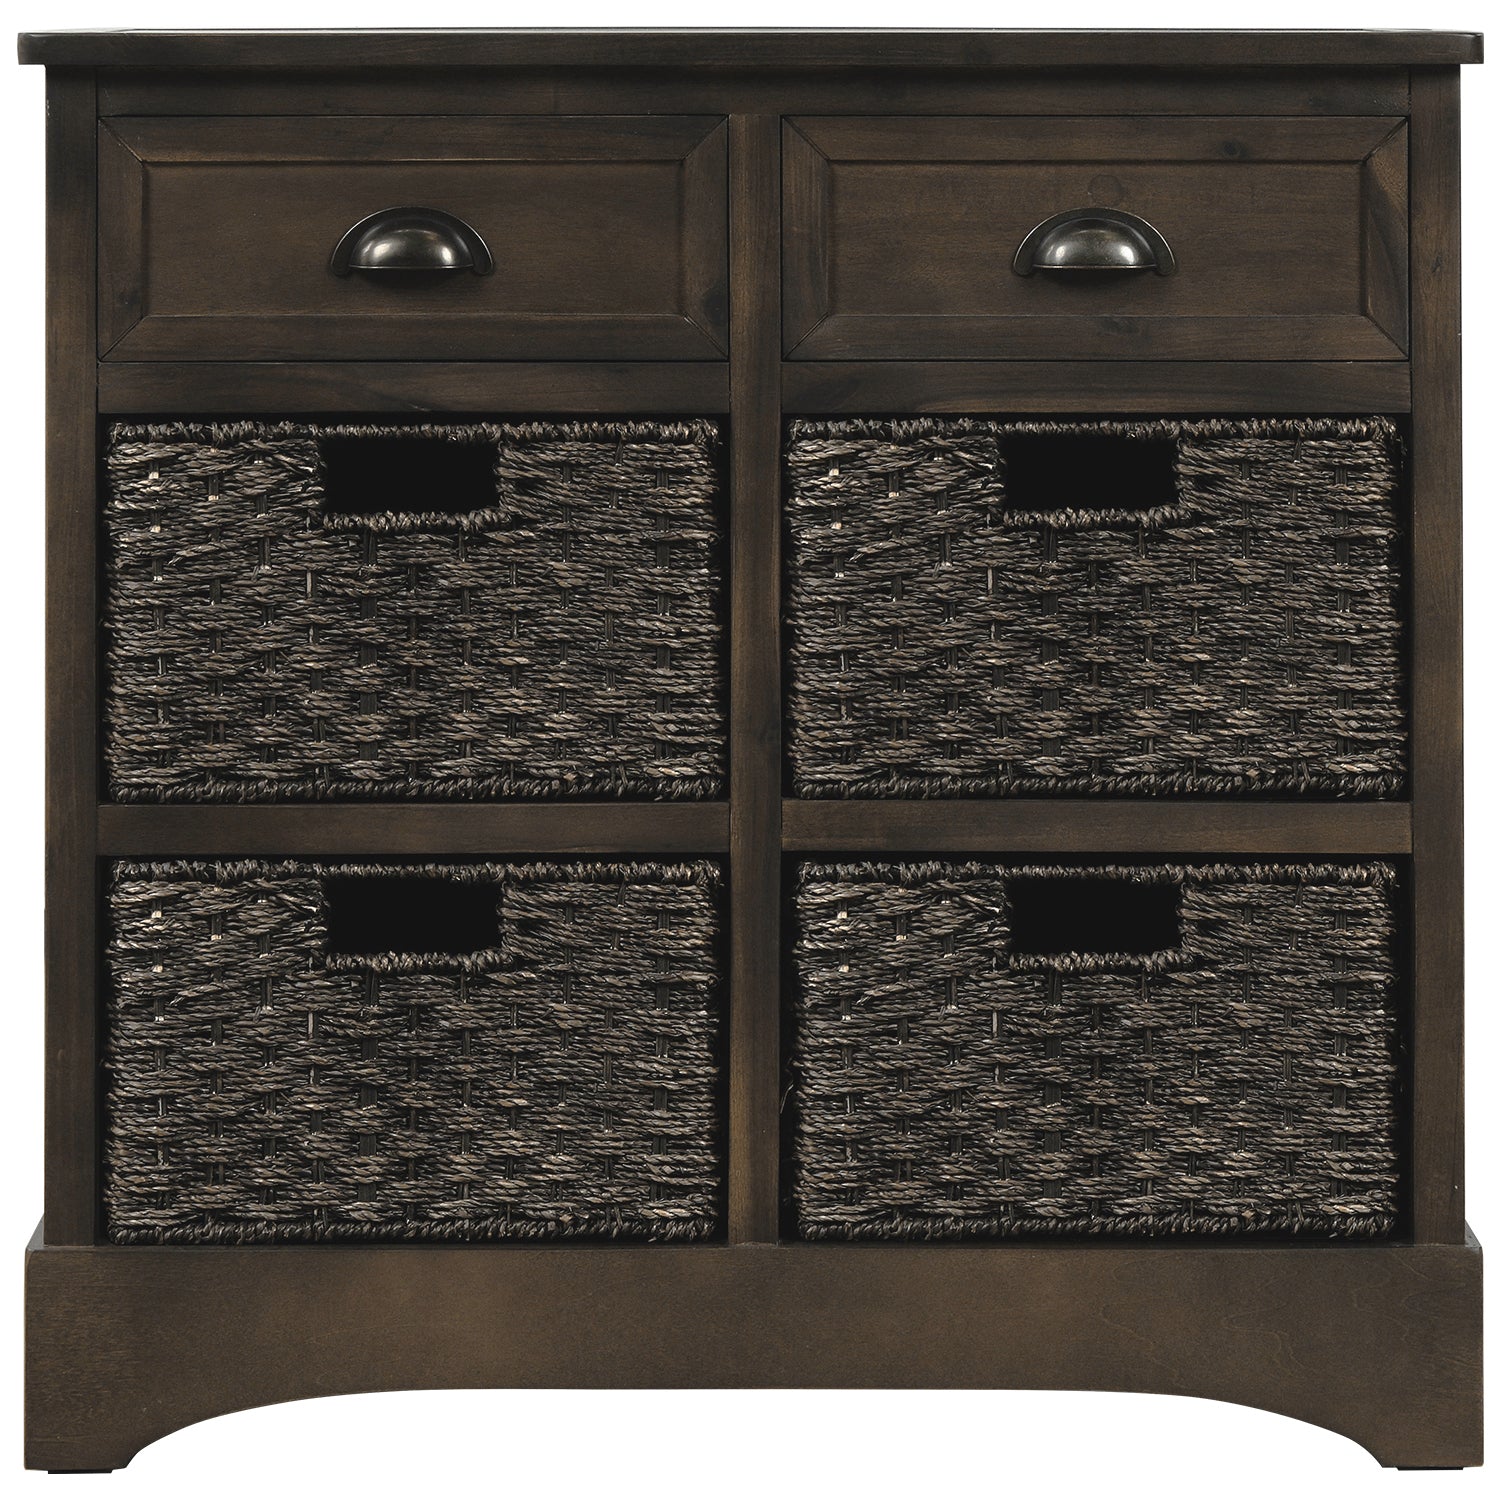 TREXM Rustic Storage Cabinet with Two Drawers and Four  Classic Rattan Basket for Dining Room/Living Room (Brown Gray)